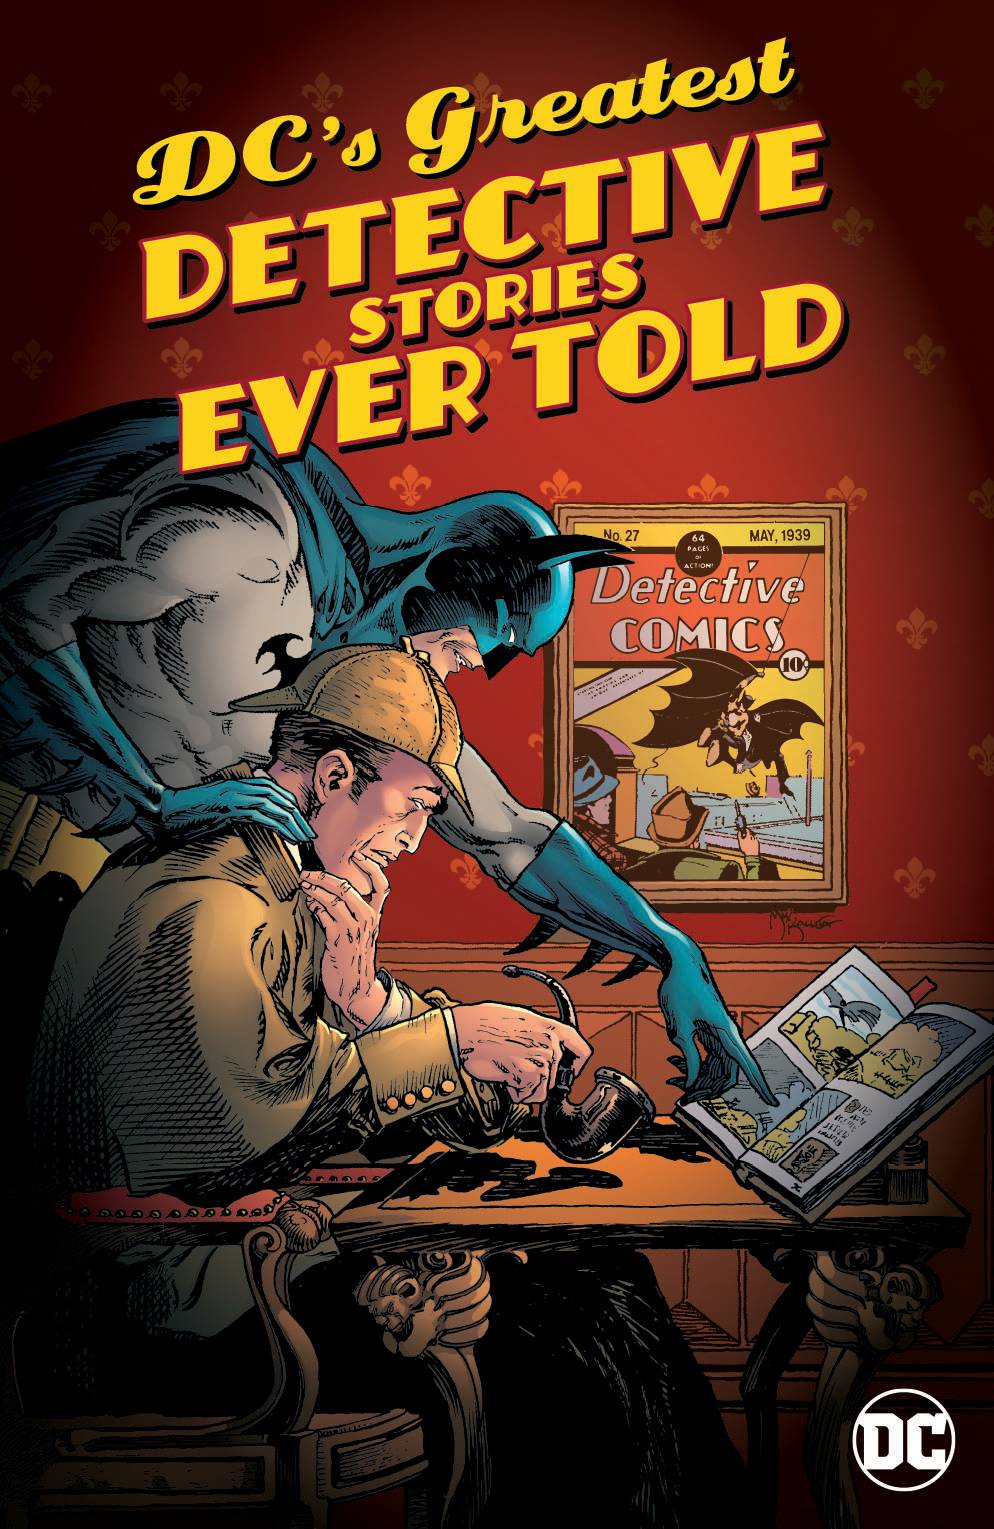 DCS GREATEST DETECTIVE STORIES EVER TOLD TP